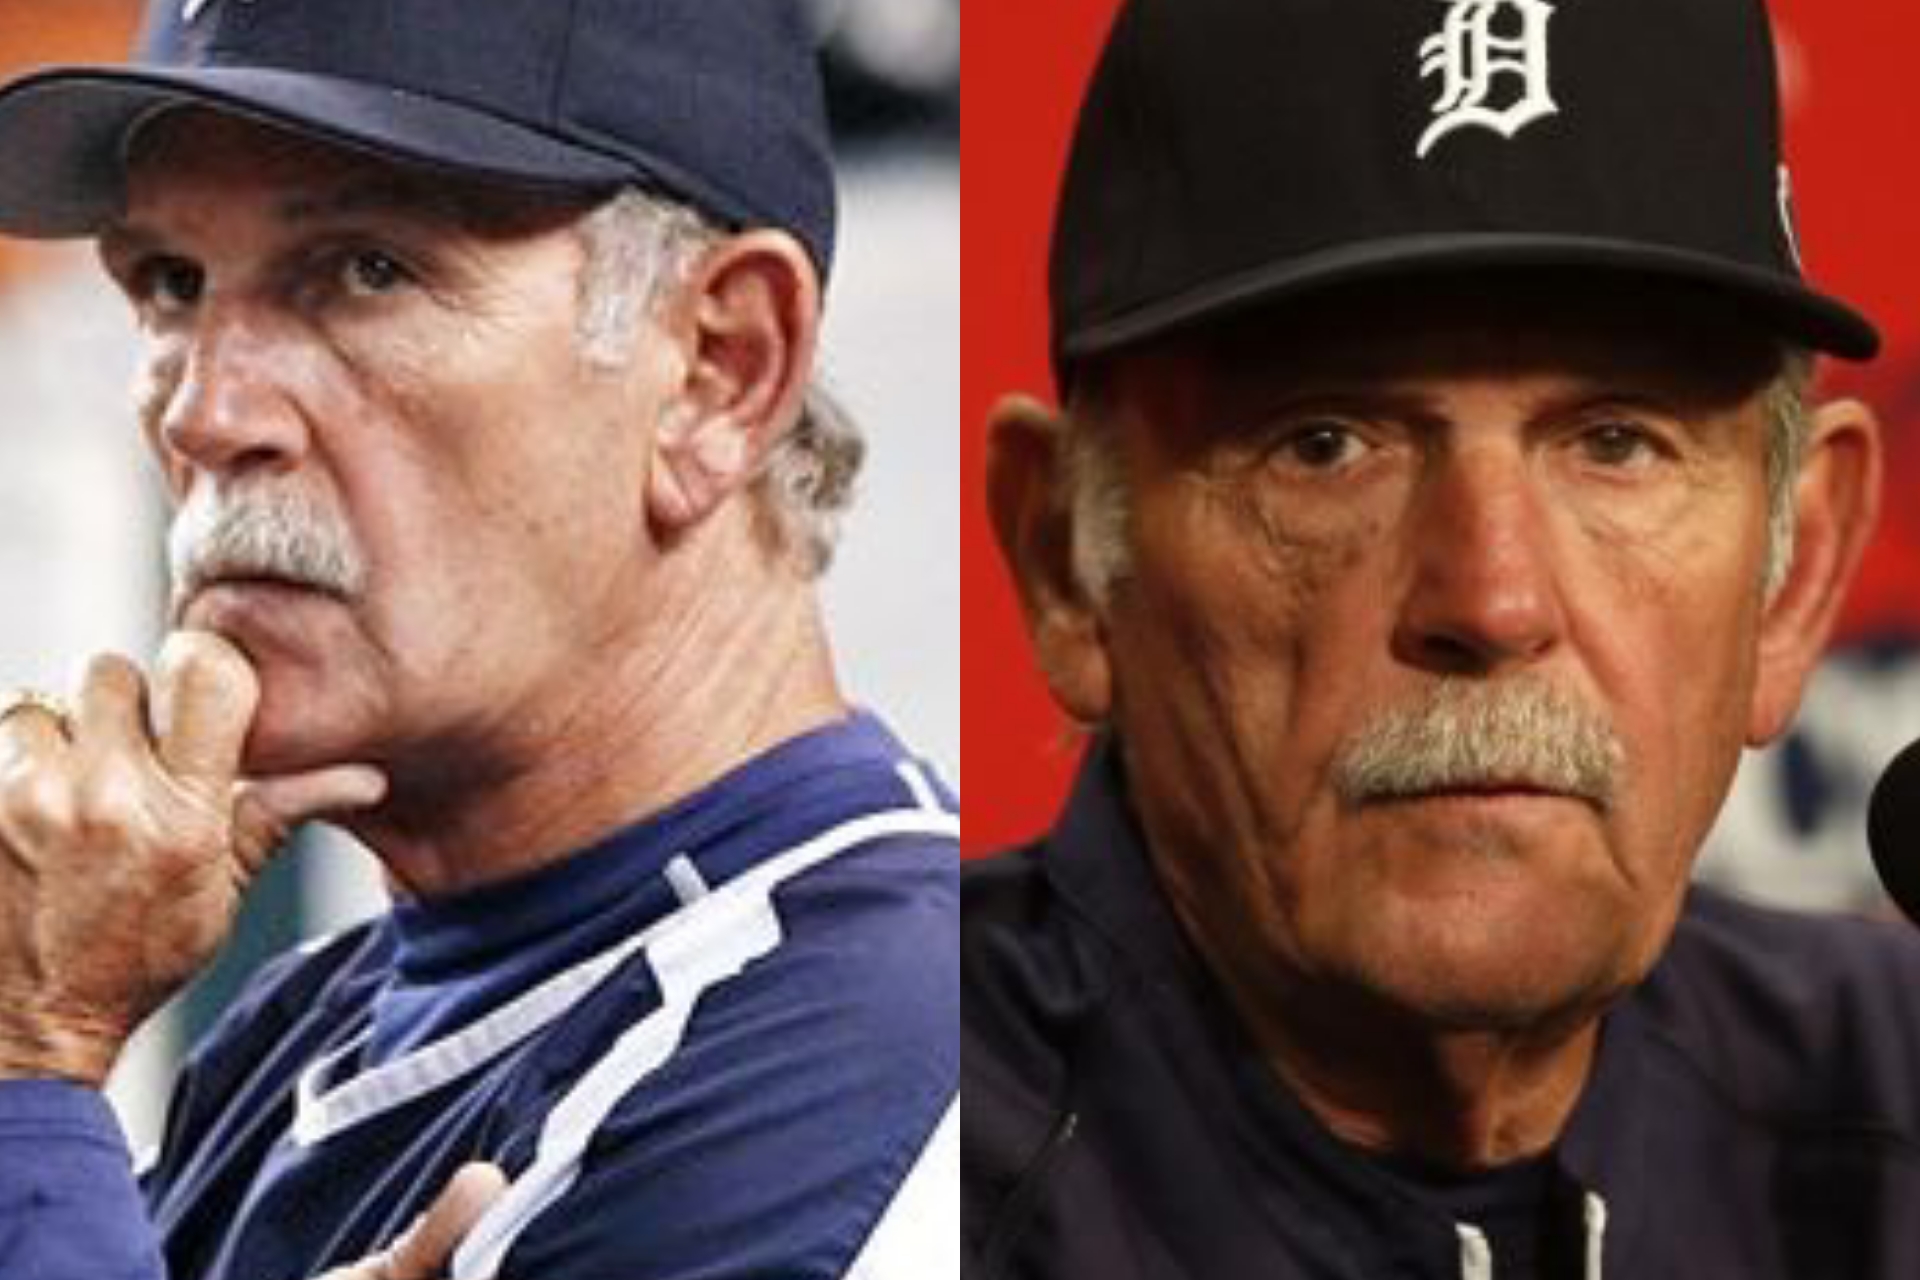 Jim Leyland Biography: Age, Wife, Shirts, Hall of Fame, Awards And Net Worth